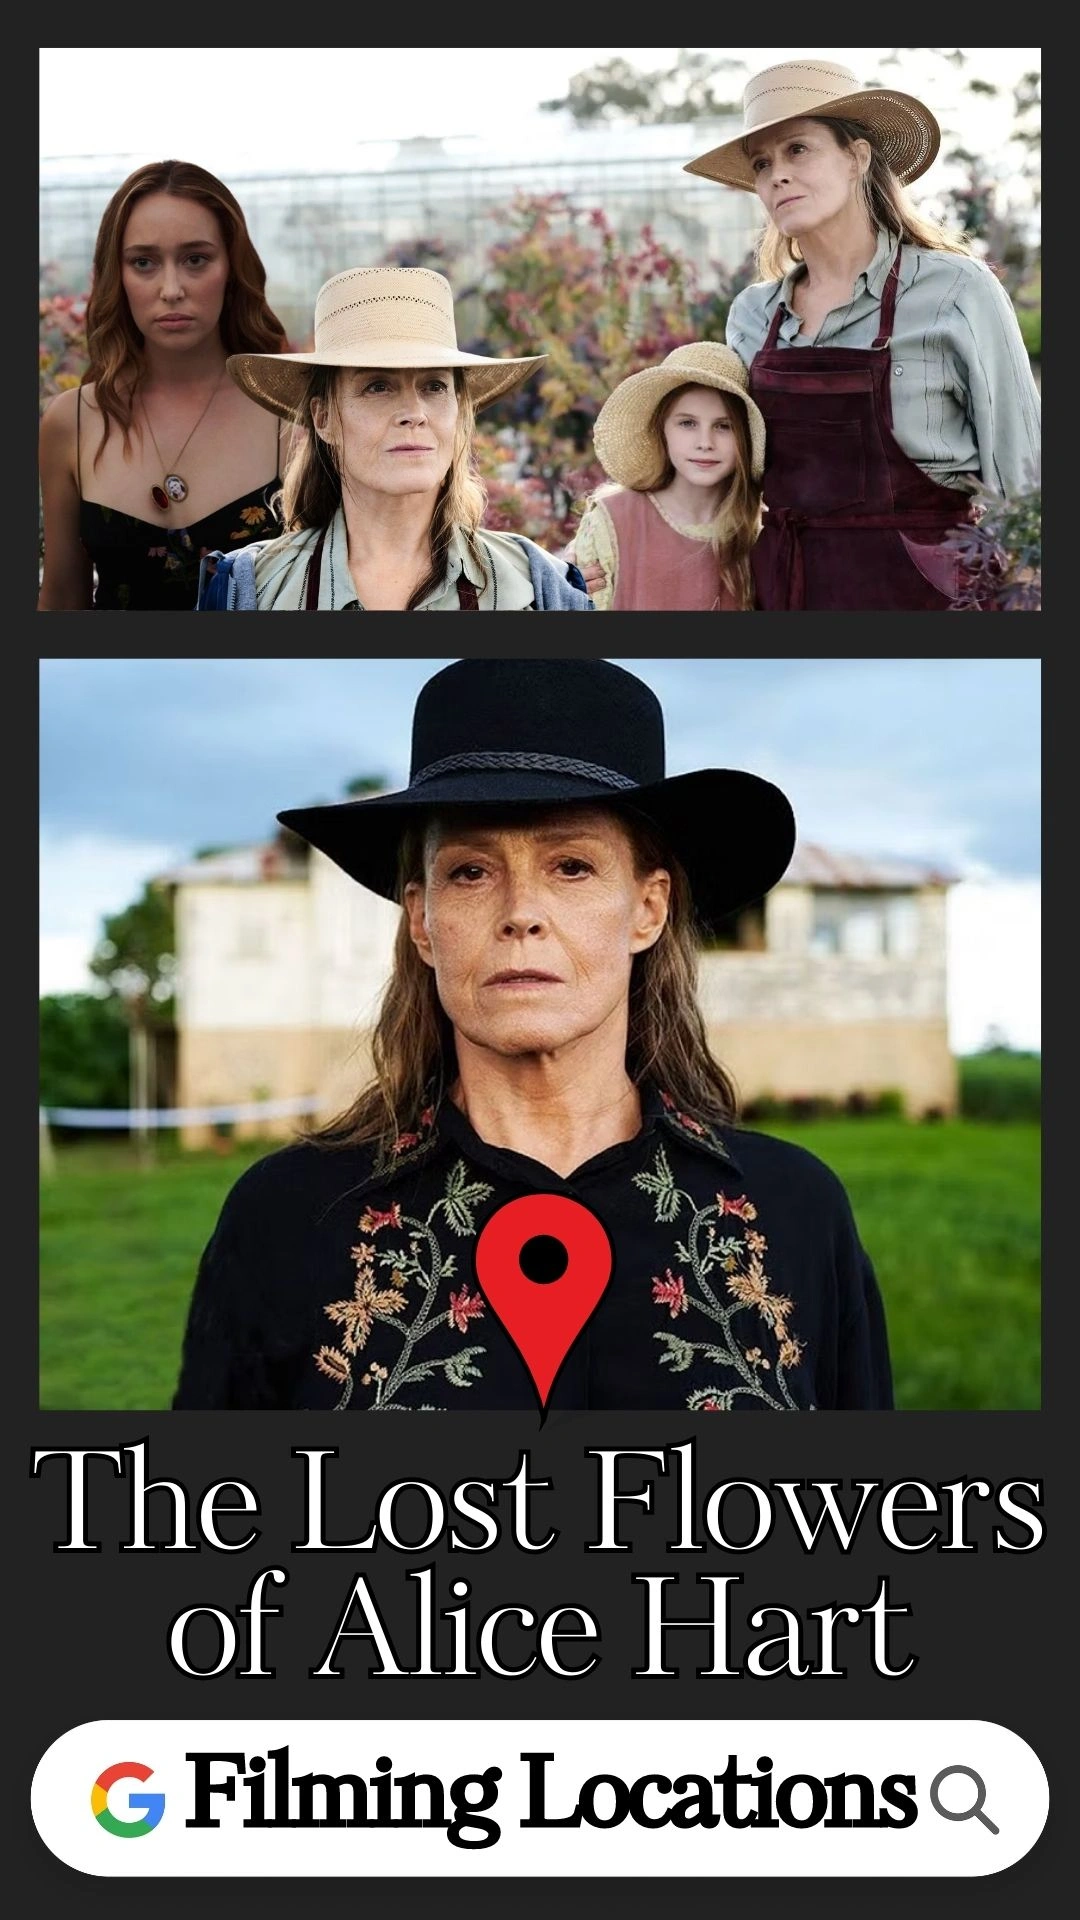 The Lost Flowers of Alice Hart Filming Locations